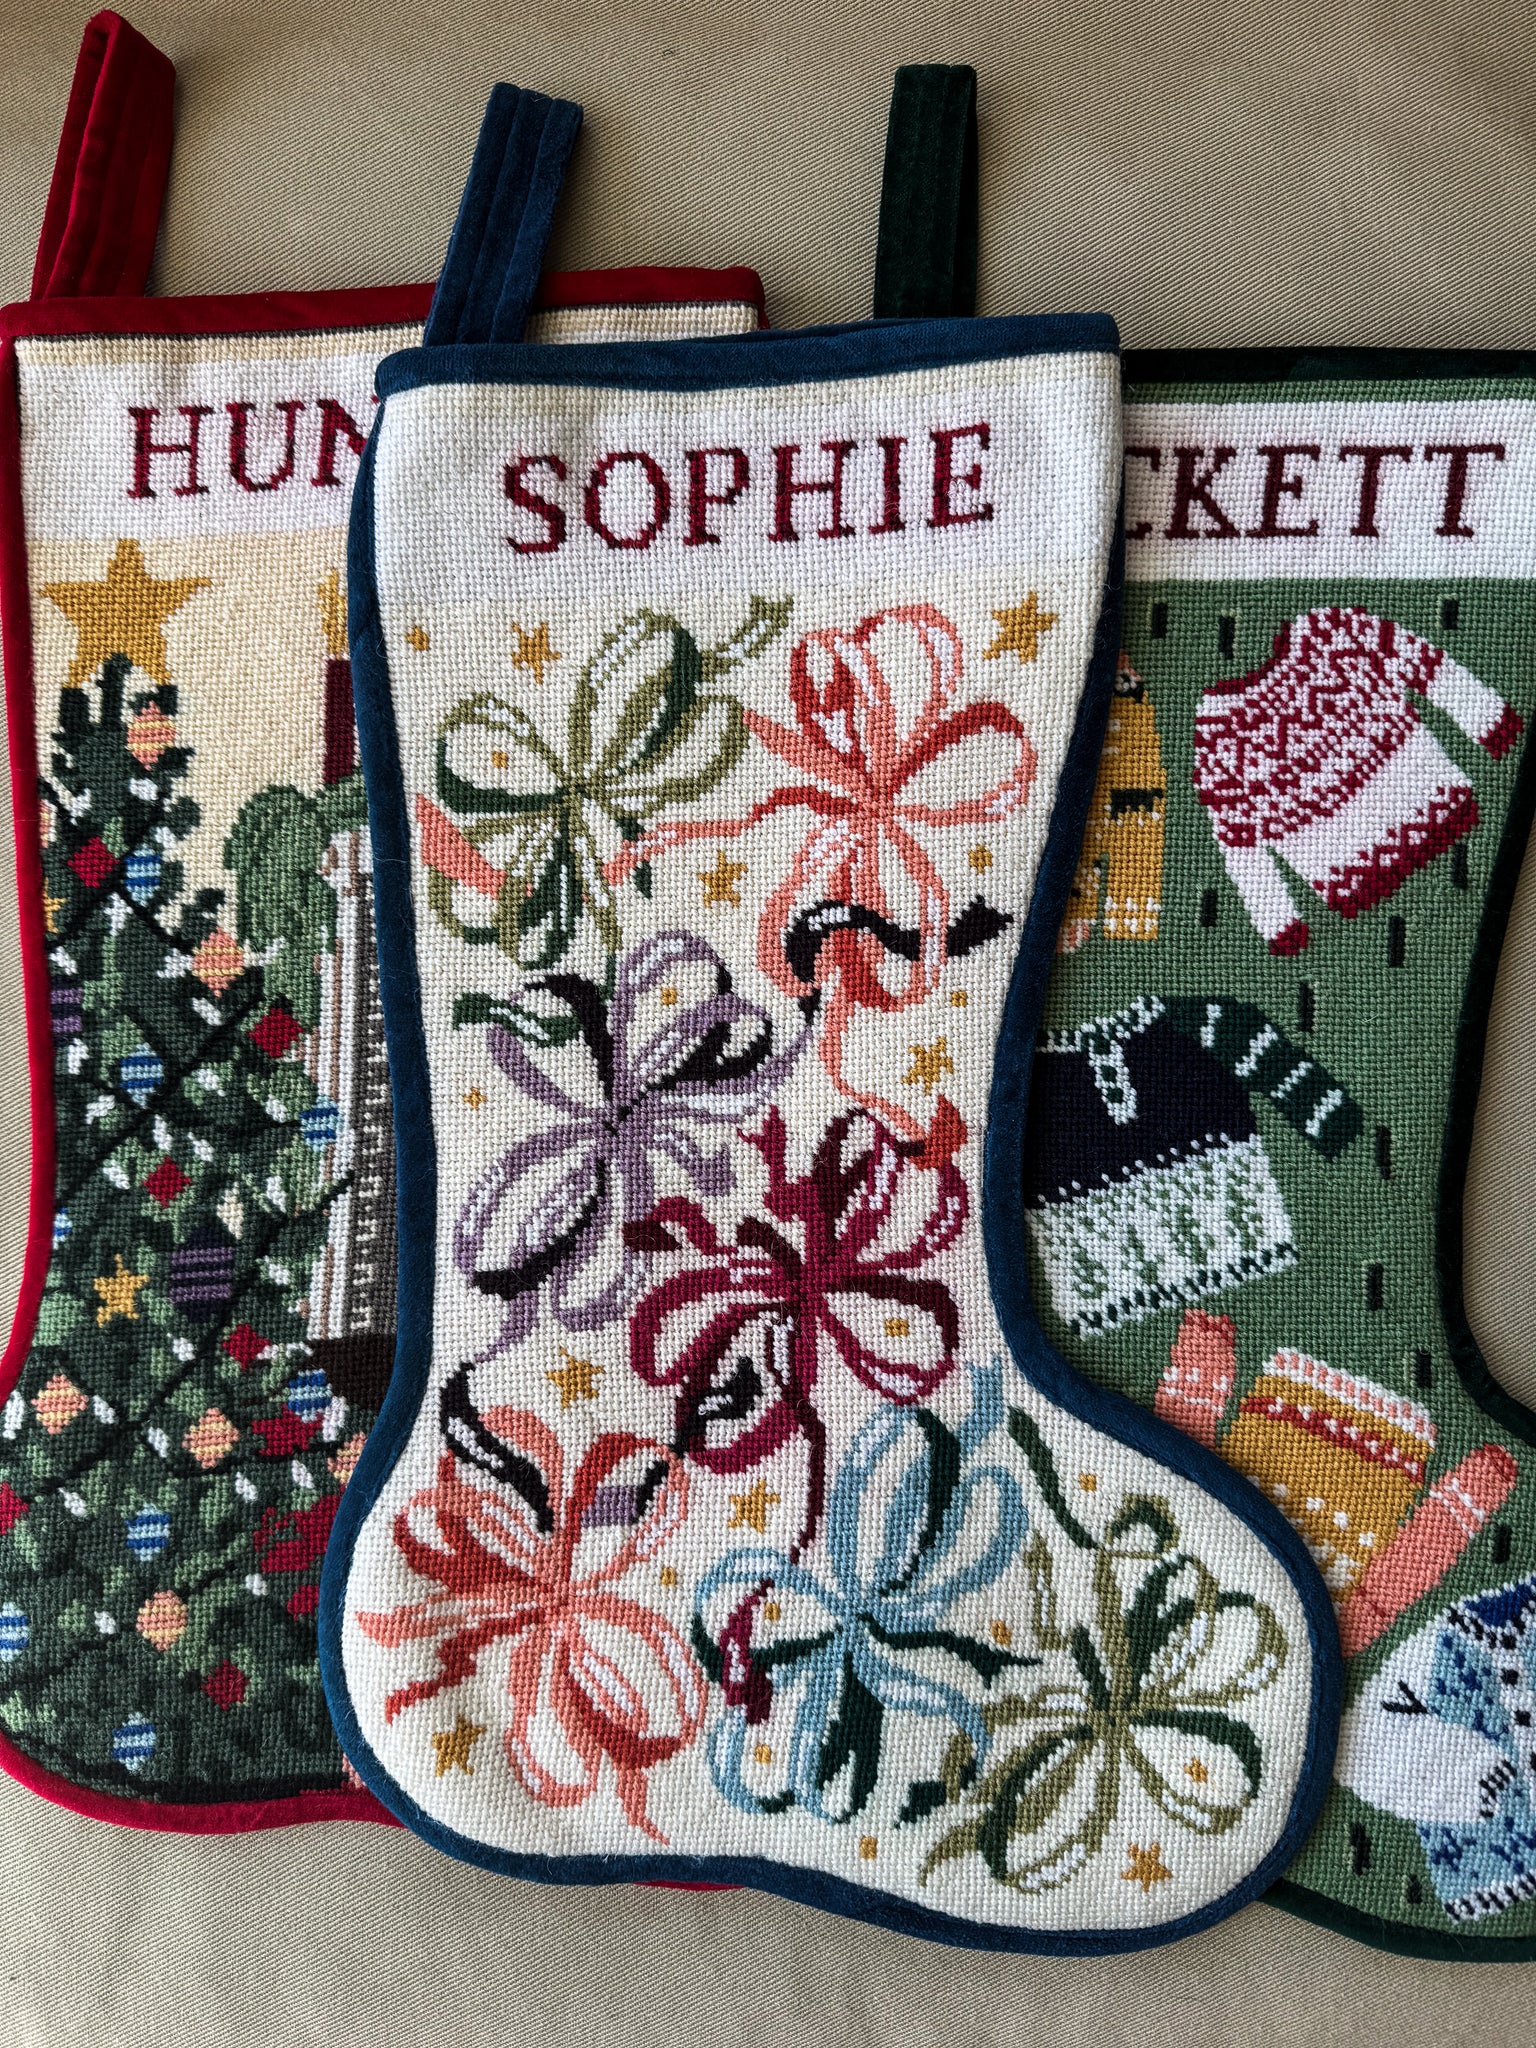 Stitched Stocking - Ribbons